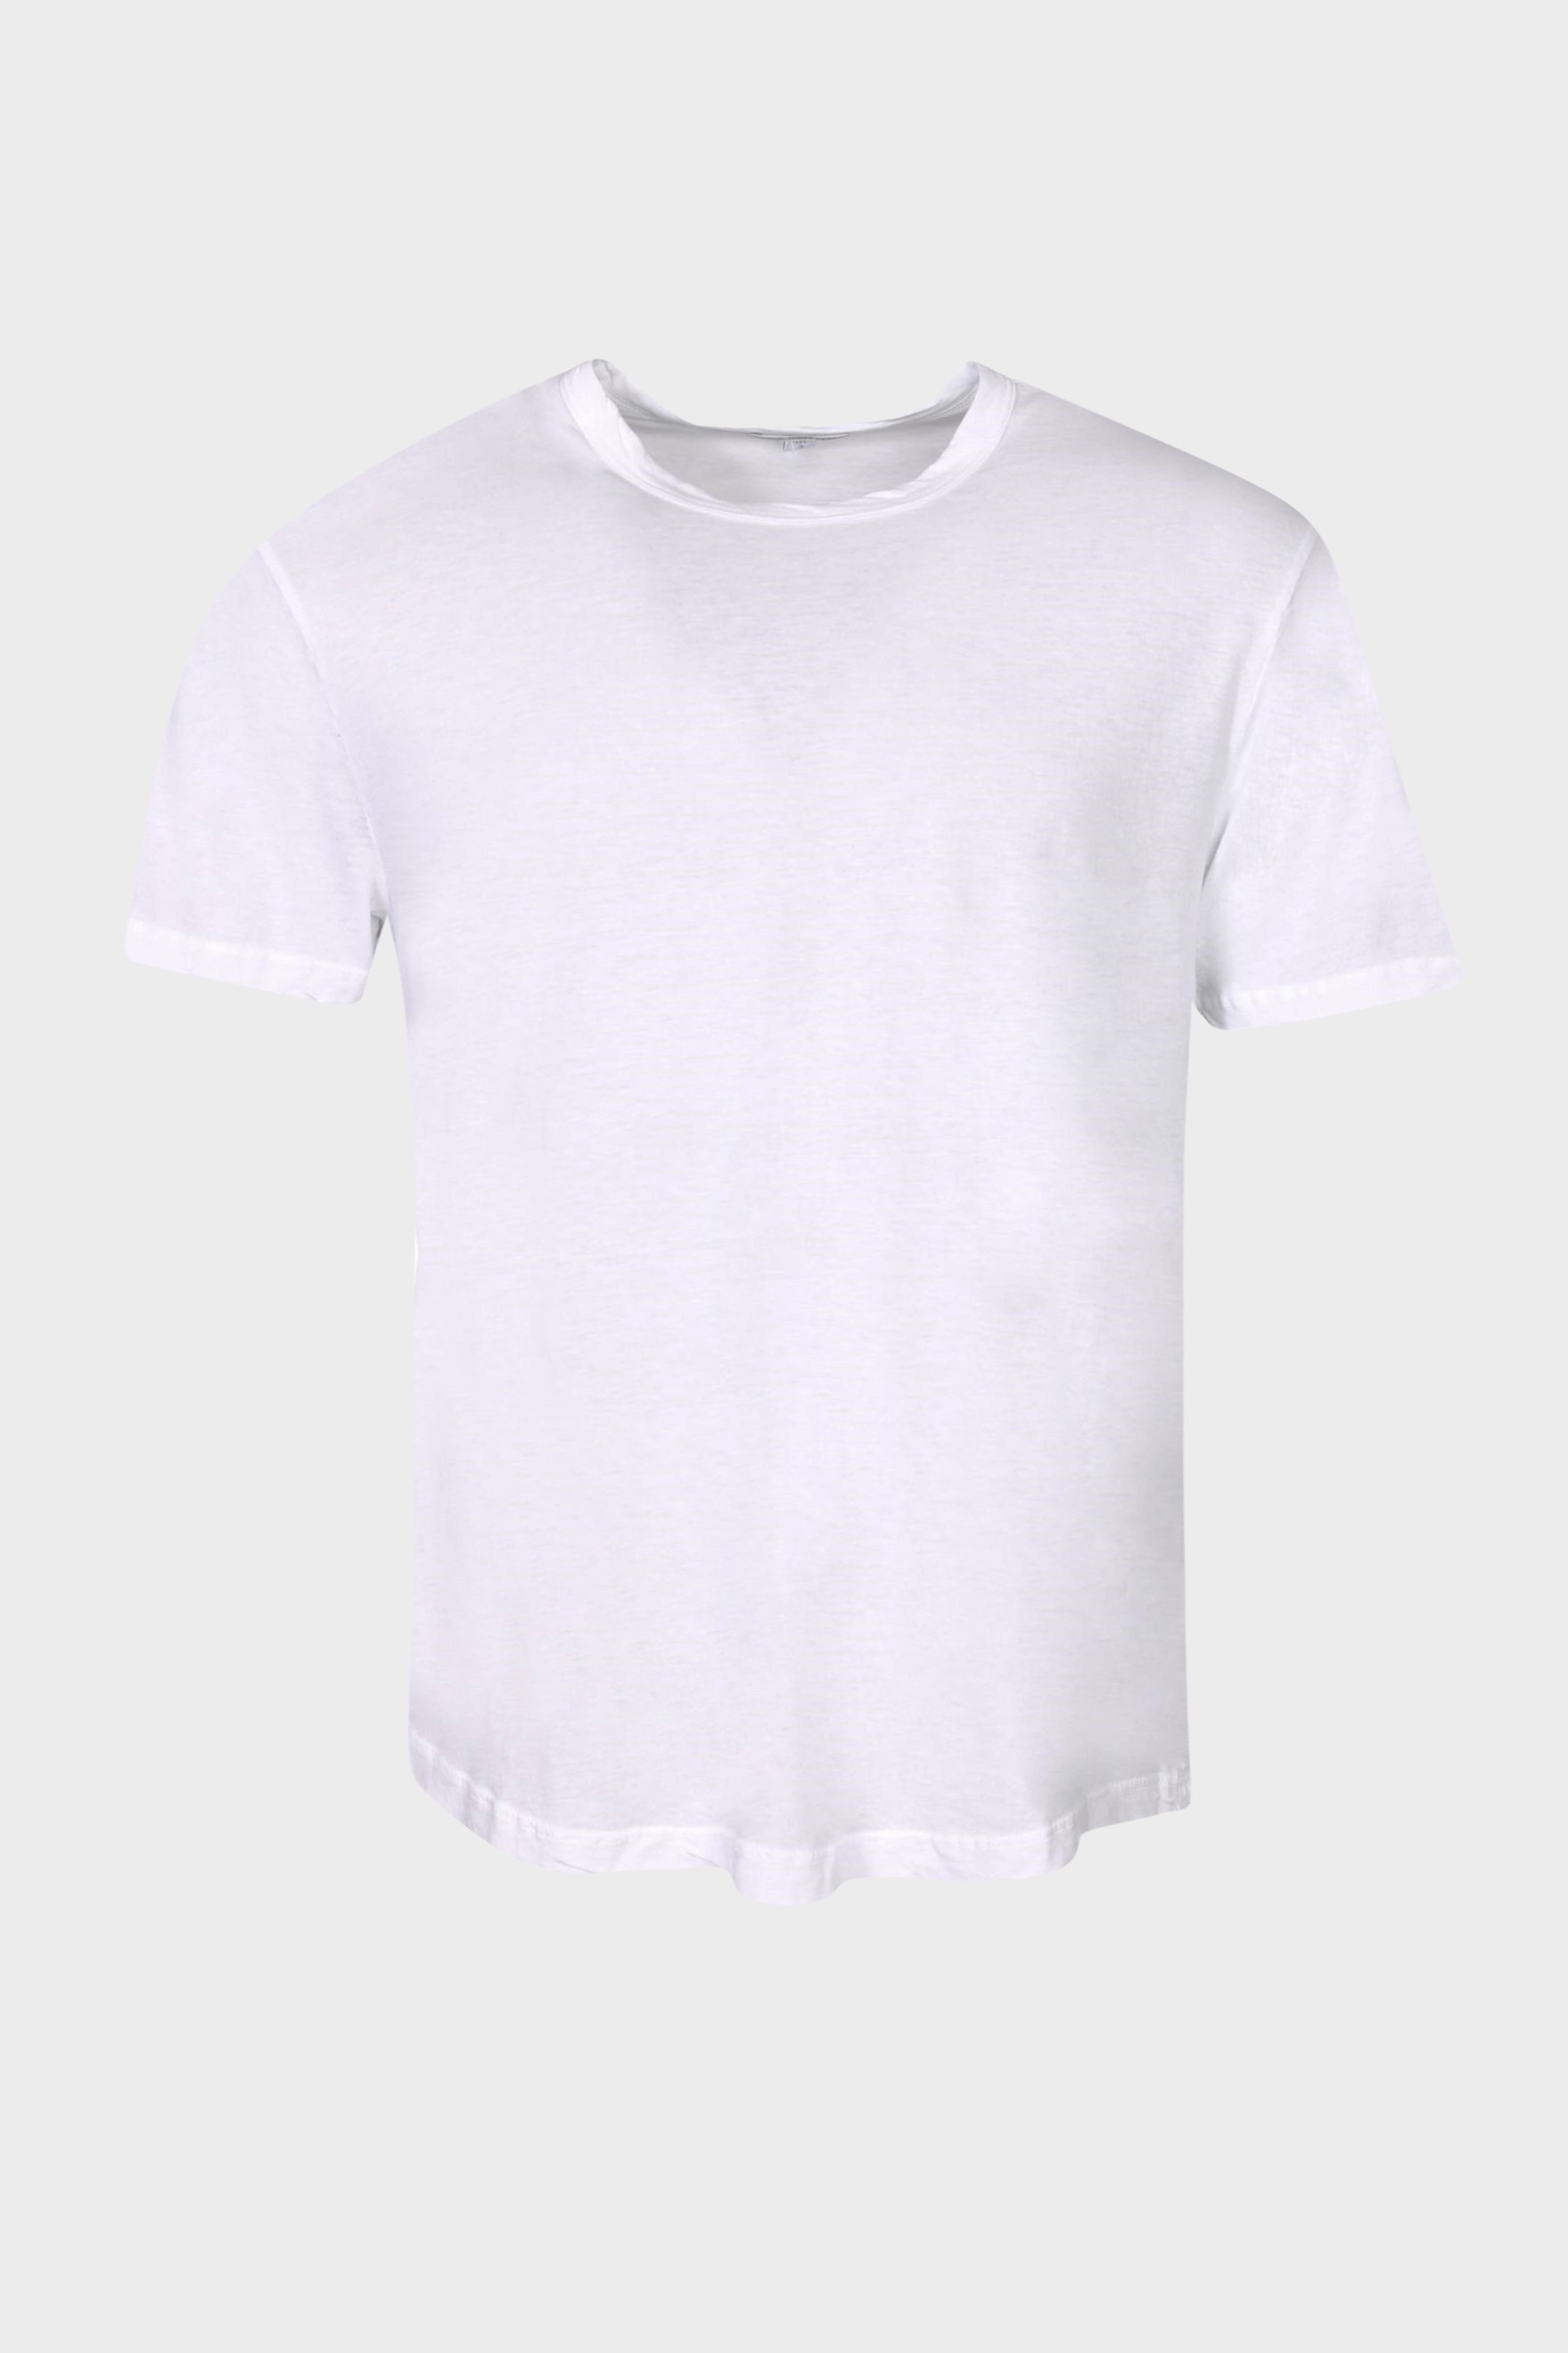 James Perse Clear Jersey Crew Neck in White S/1